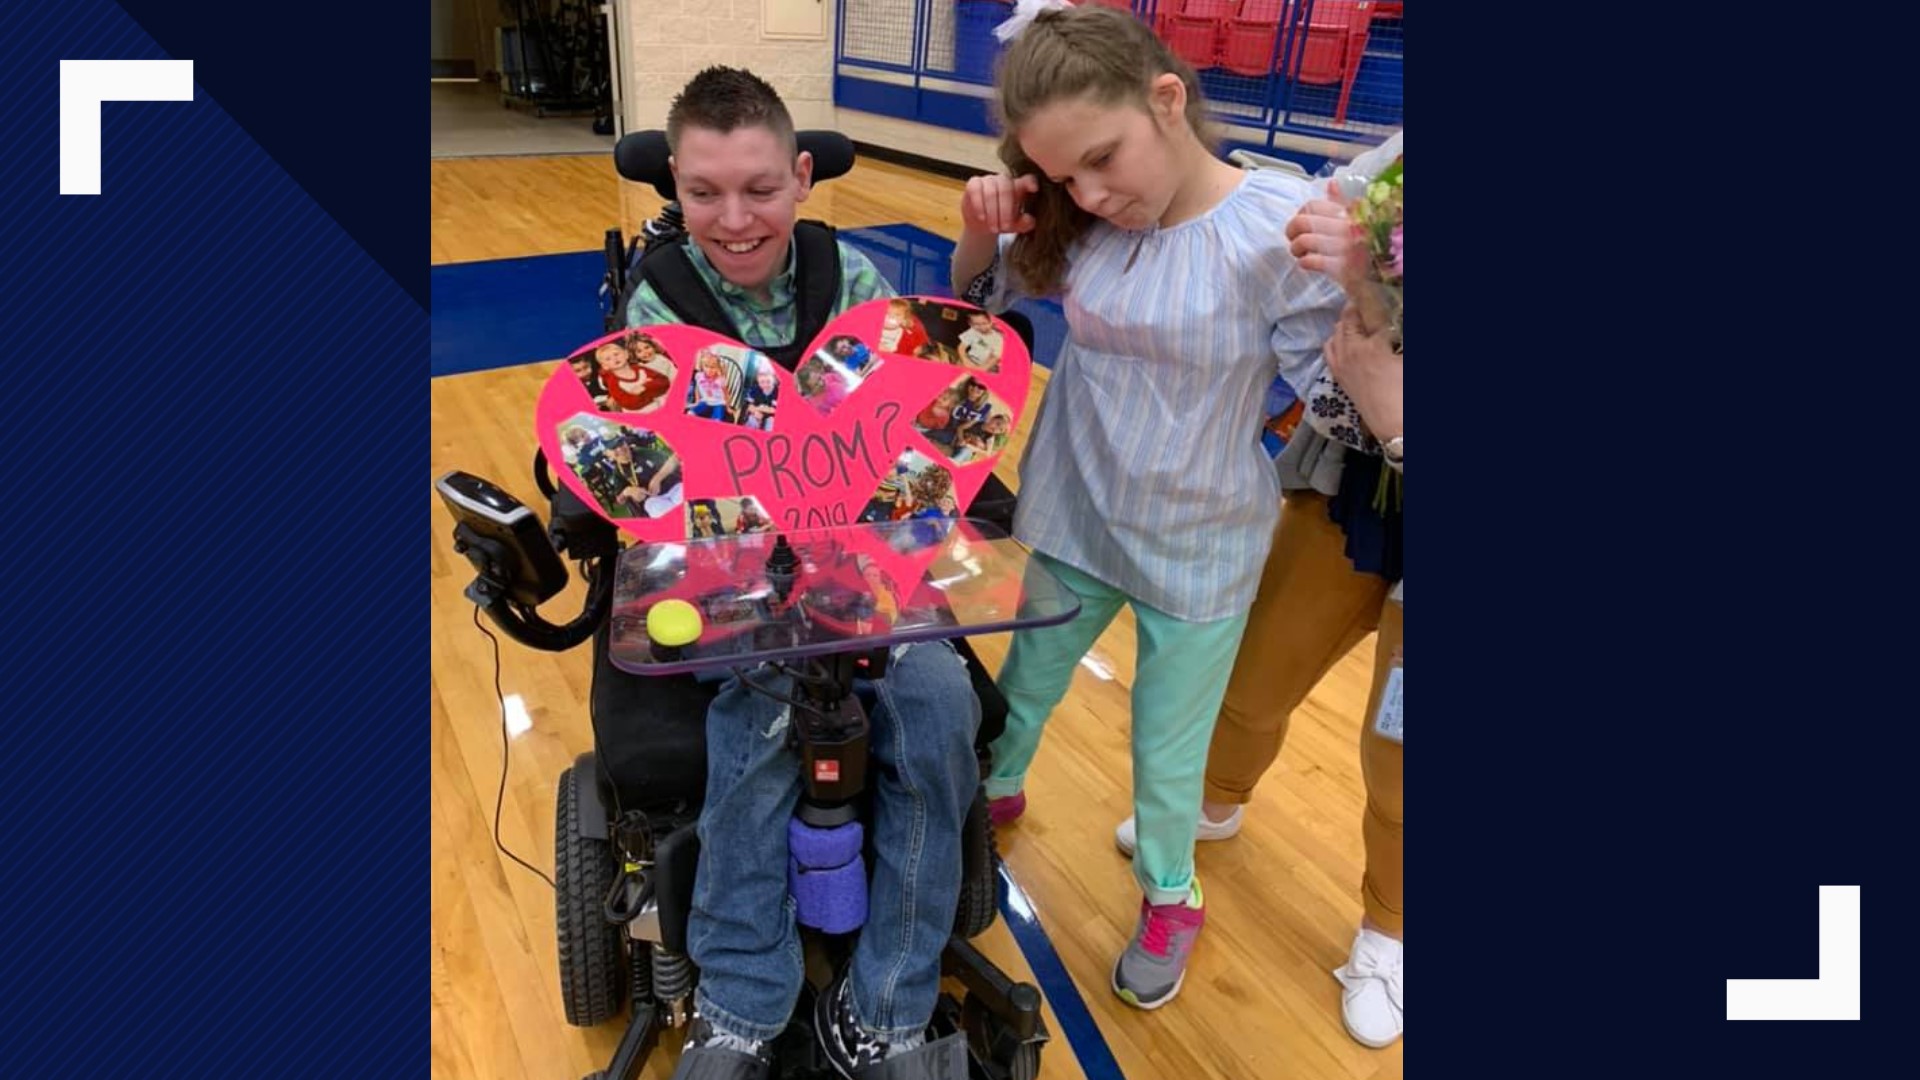 Benjamin, who is a non-verbal student, pulled out all the stops to ask Kendall, who is also a non-verbal student, to the prom.